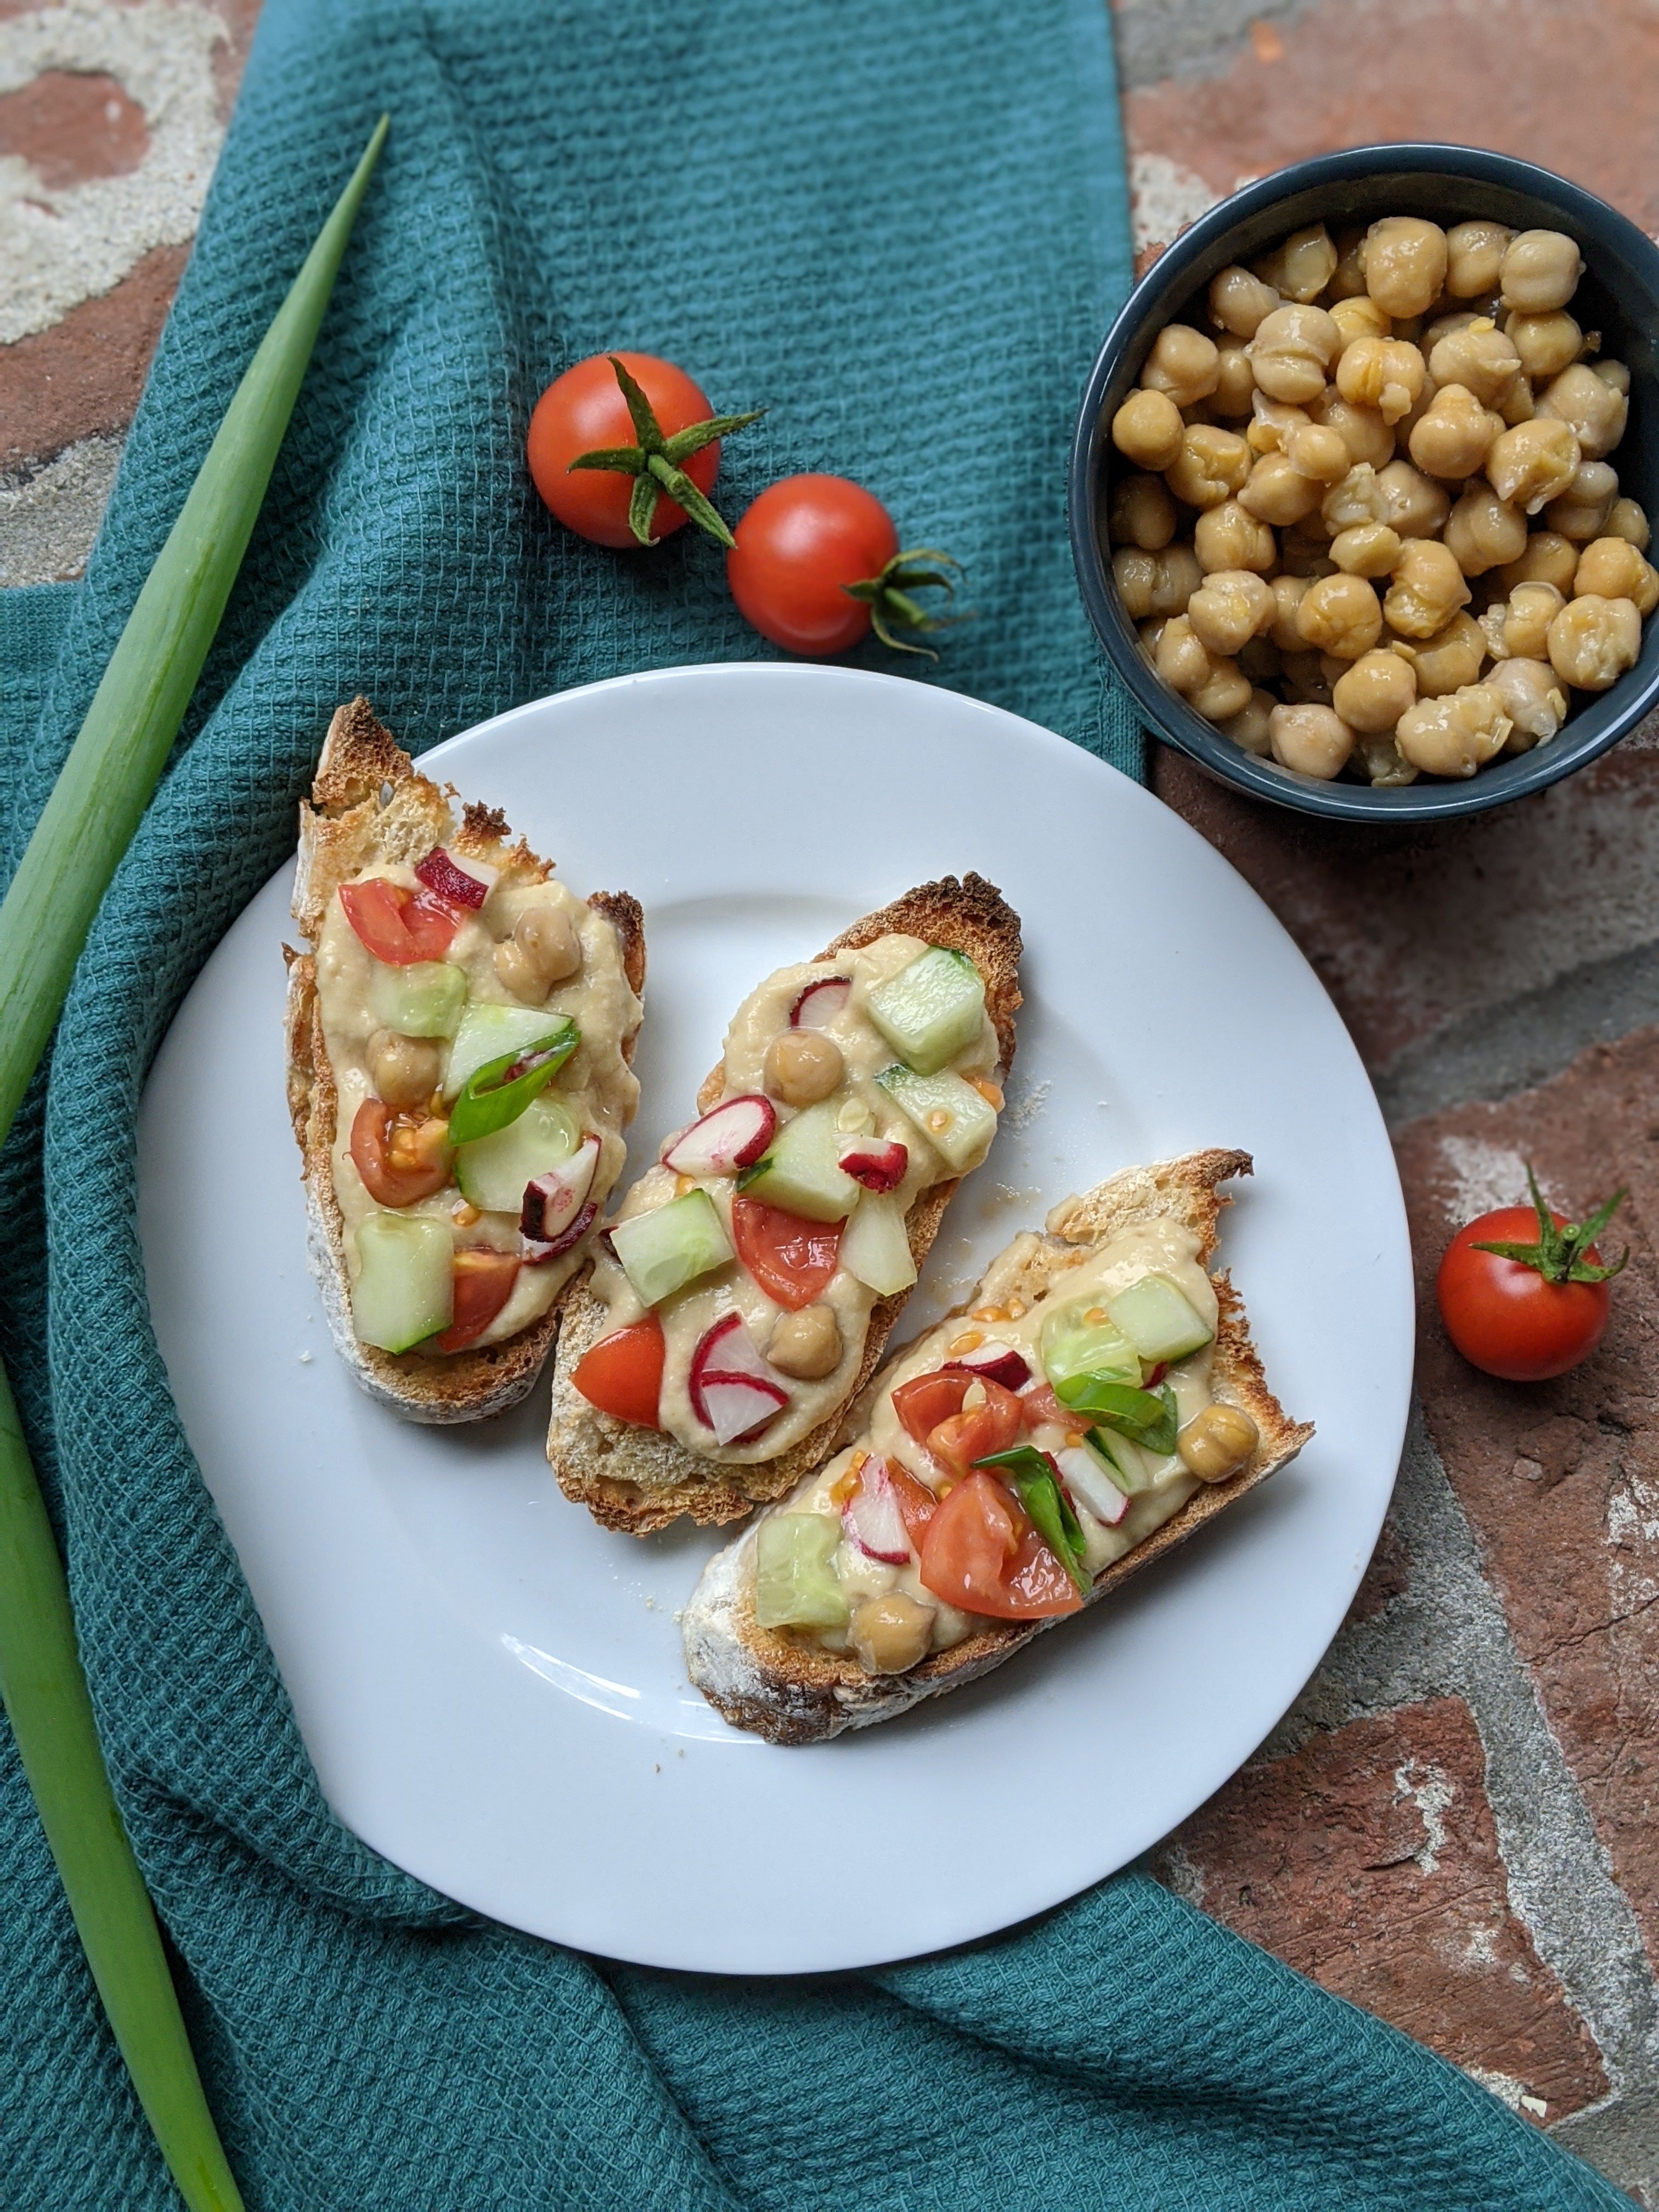 gluten free hummus toast recipe with fresh garden vegetables tomatoes chickpeas green onions cucumber recipes to use fresh tomatoes for breakfast snack healthy fresh snack ideas